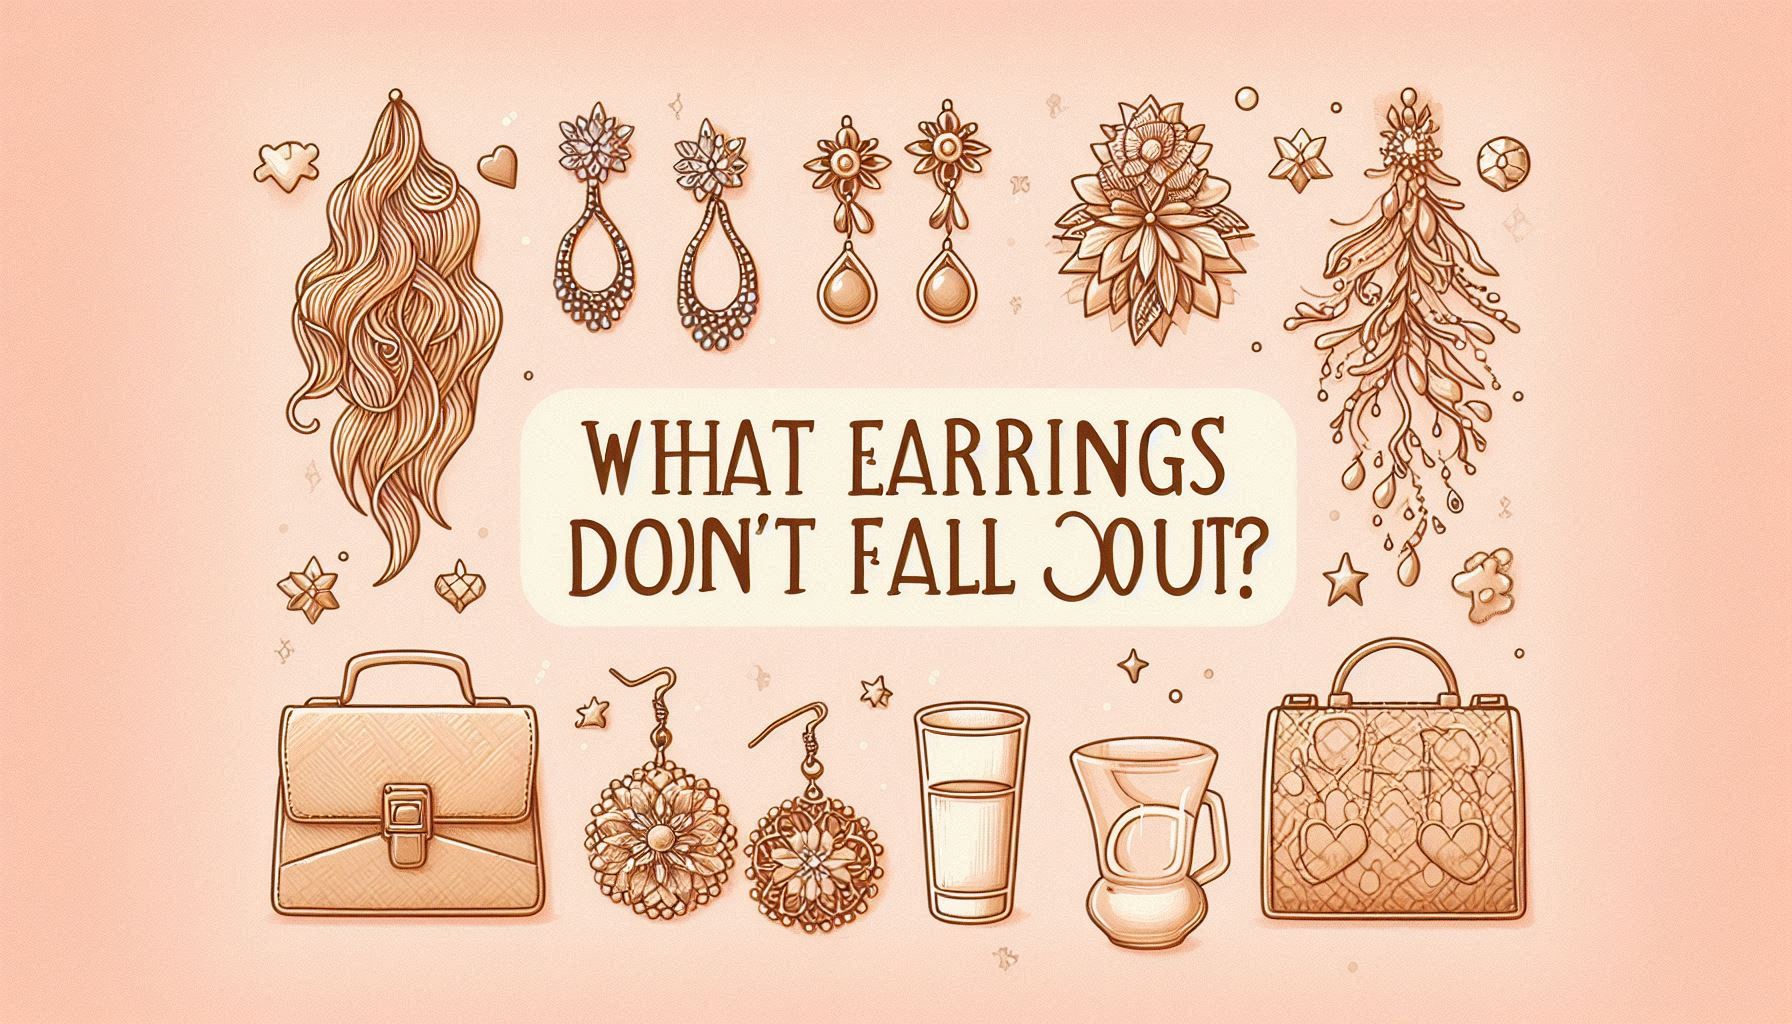 What Earrings Don't Fall Out?